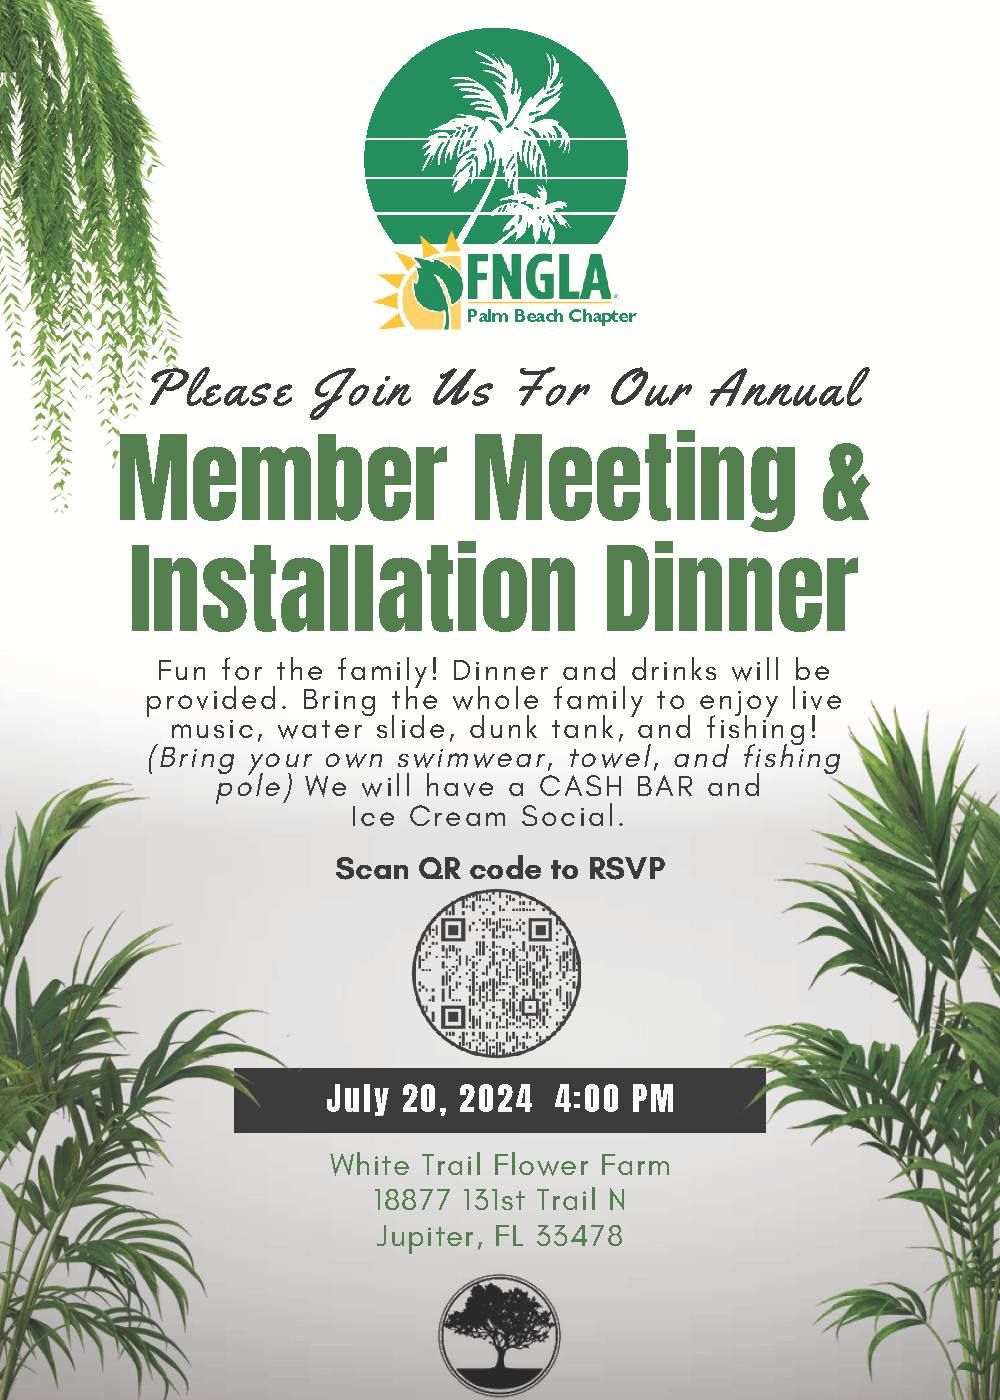 FNGLA Palm Beach Chapter Annual Member Meeting & Installation